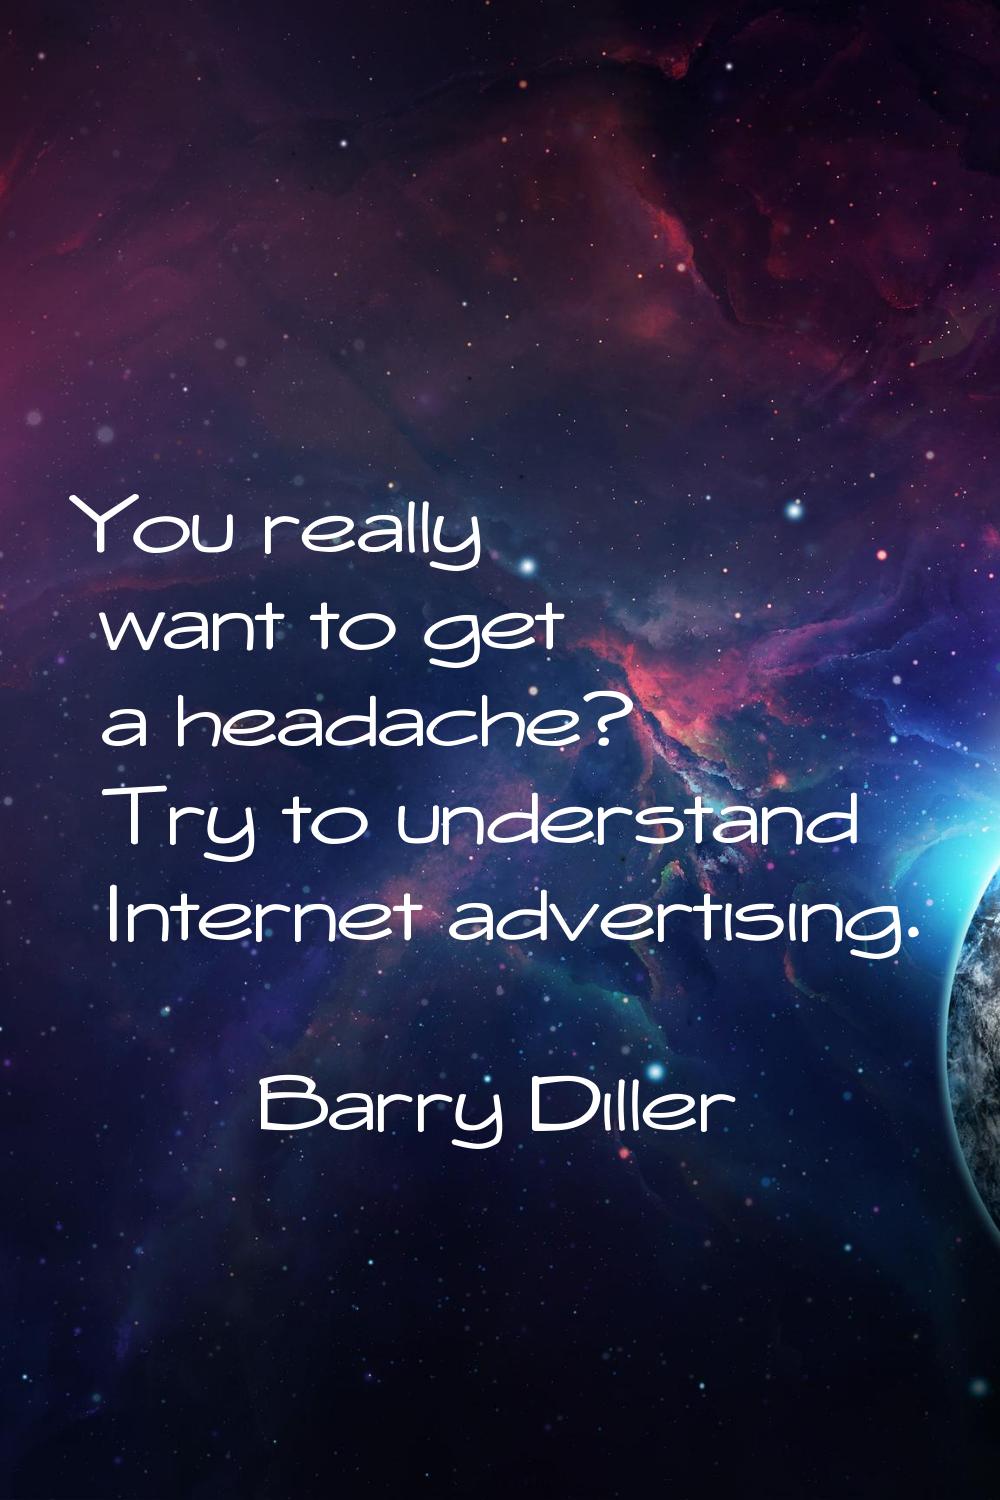 You really want to get a headache? Try to understand Internet advertising.